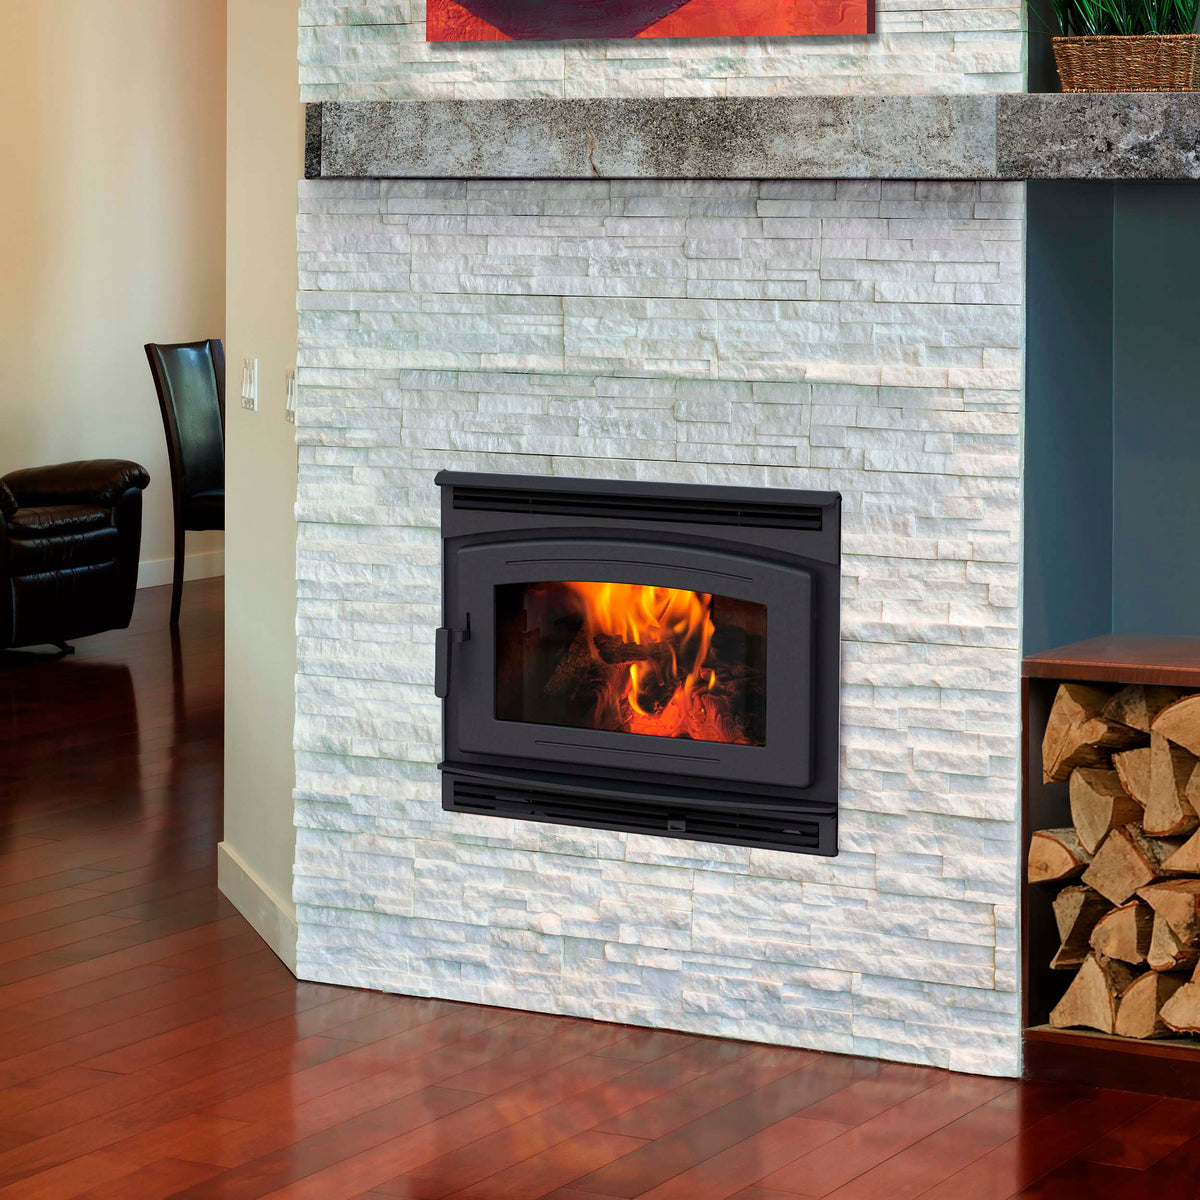 Pacific Energy FP30 Arch LE Wood Burning Fireplace - Zero-Clearance